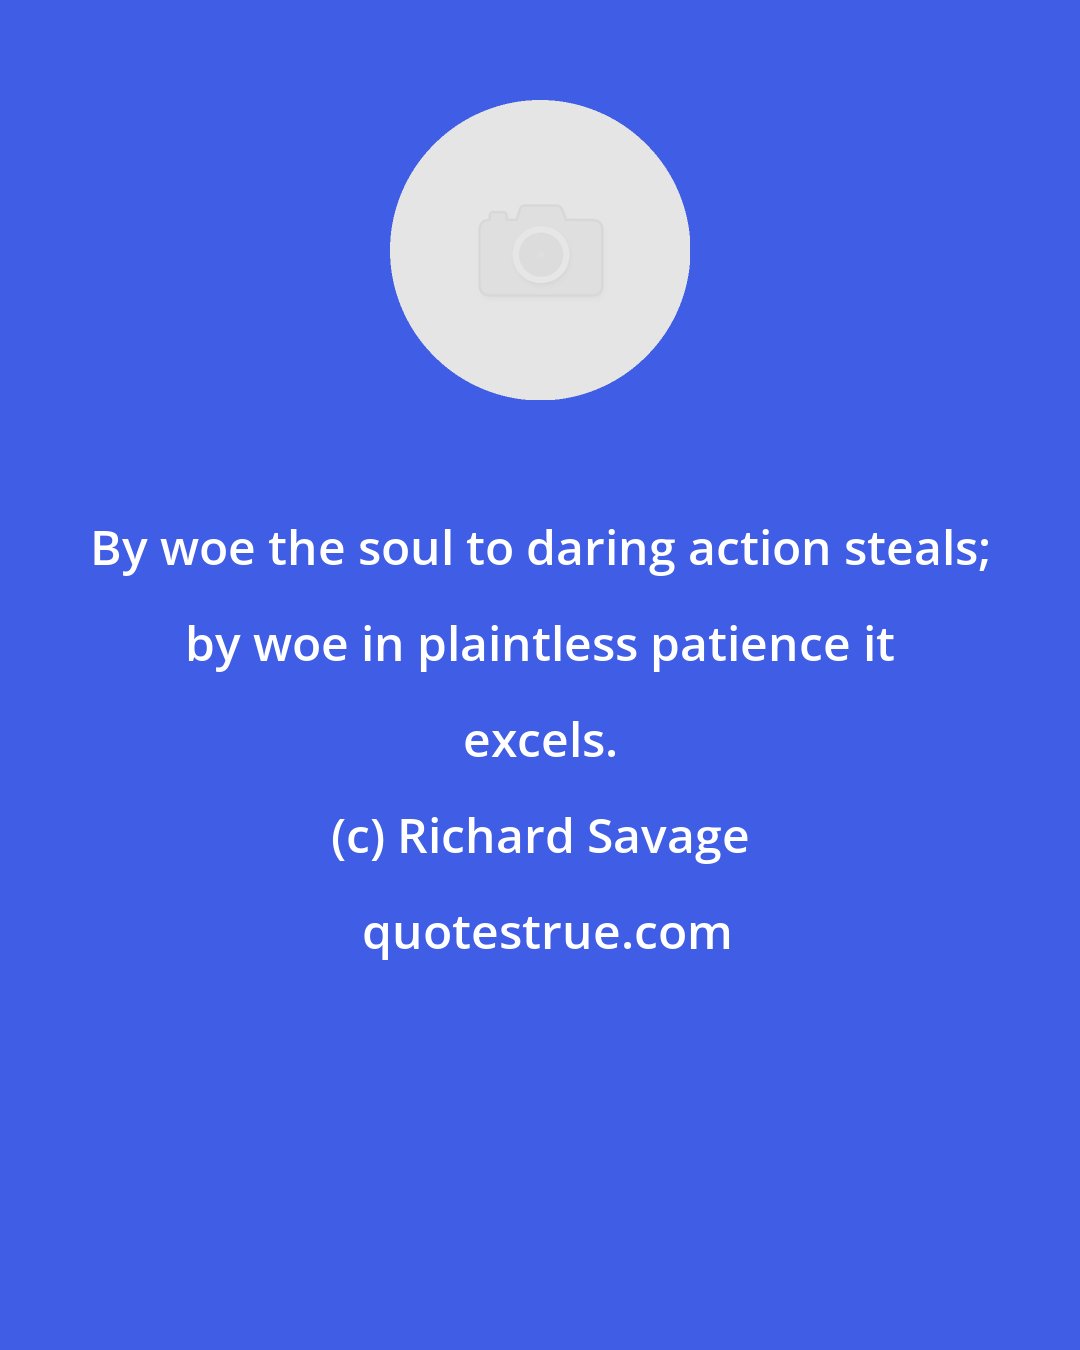 Richard Savage: By woe the soul to daring action steals; by woe in plaintless patience it excels.